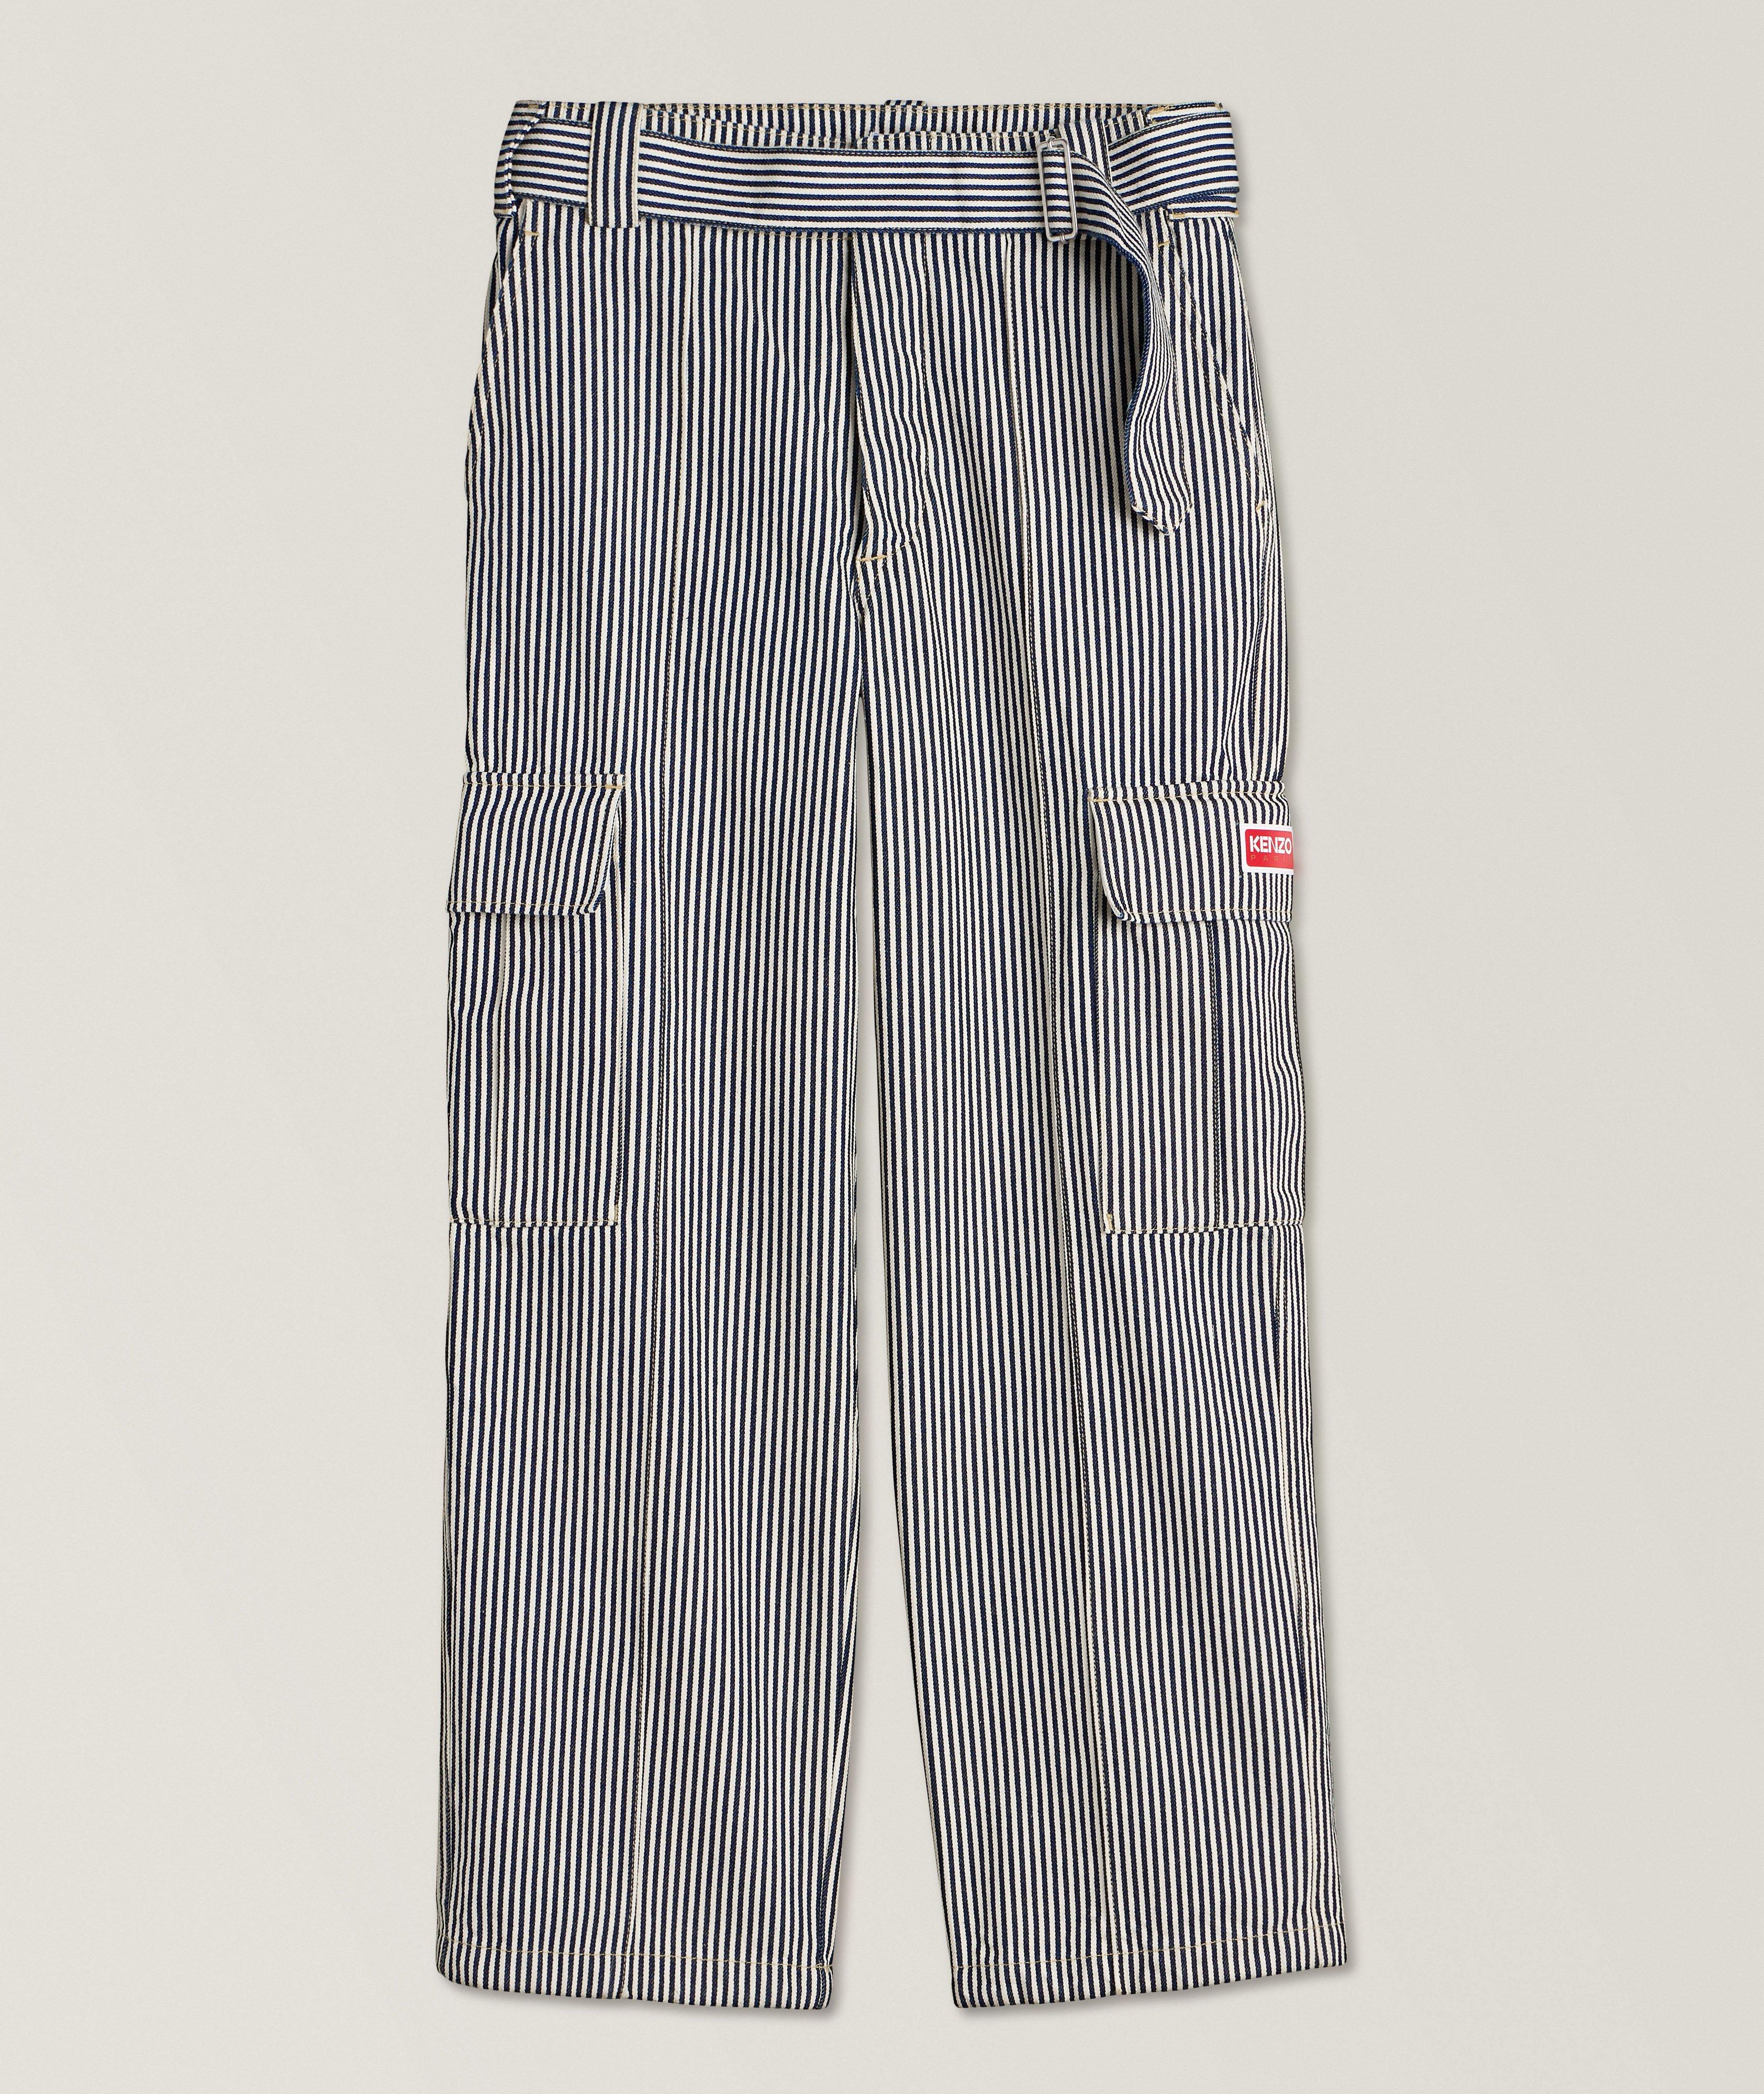 Striped Cargo Jeans image 0